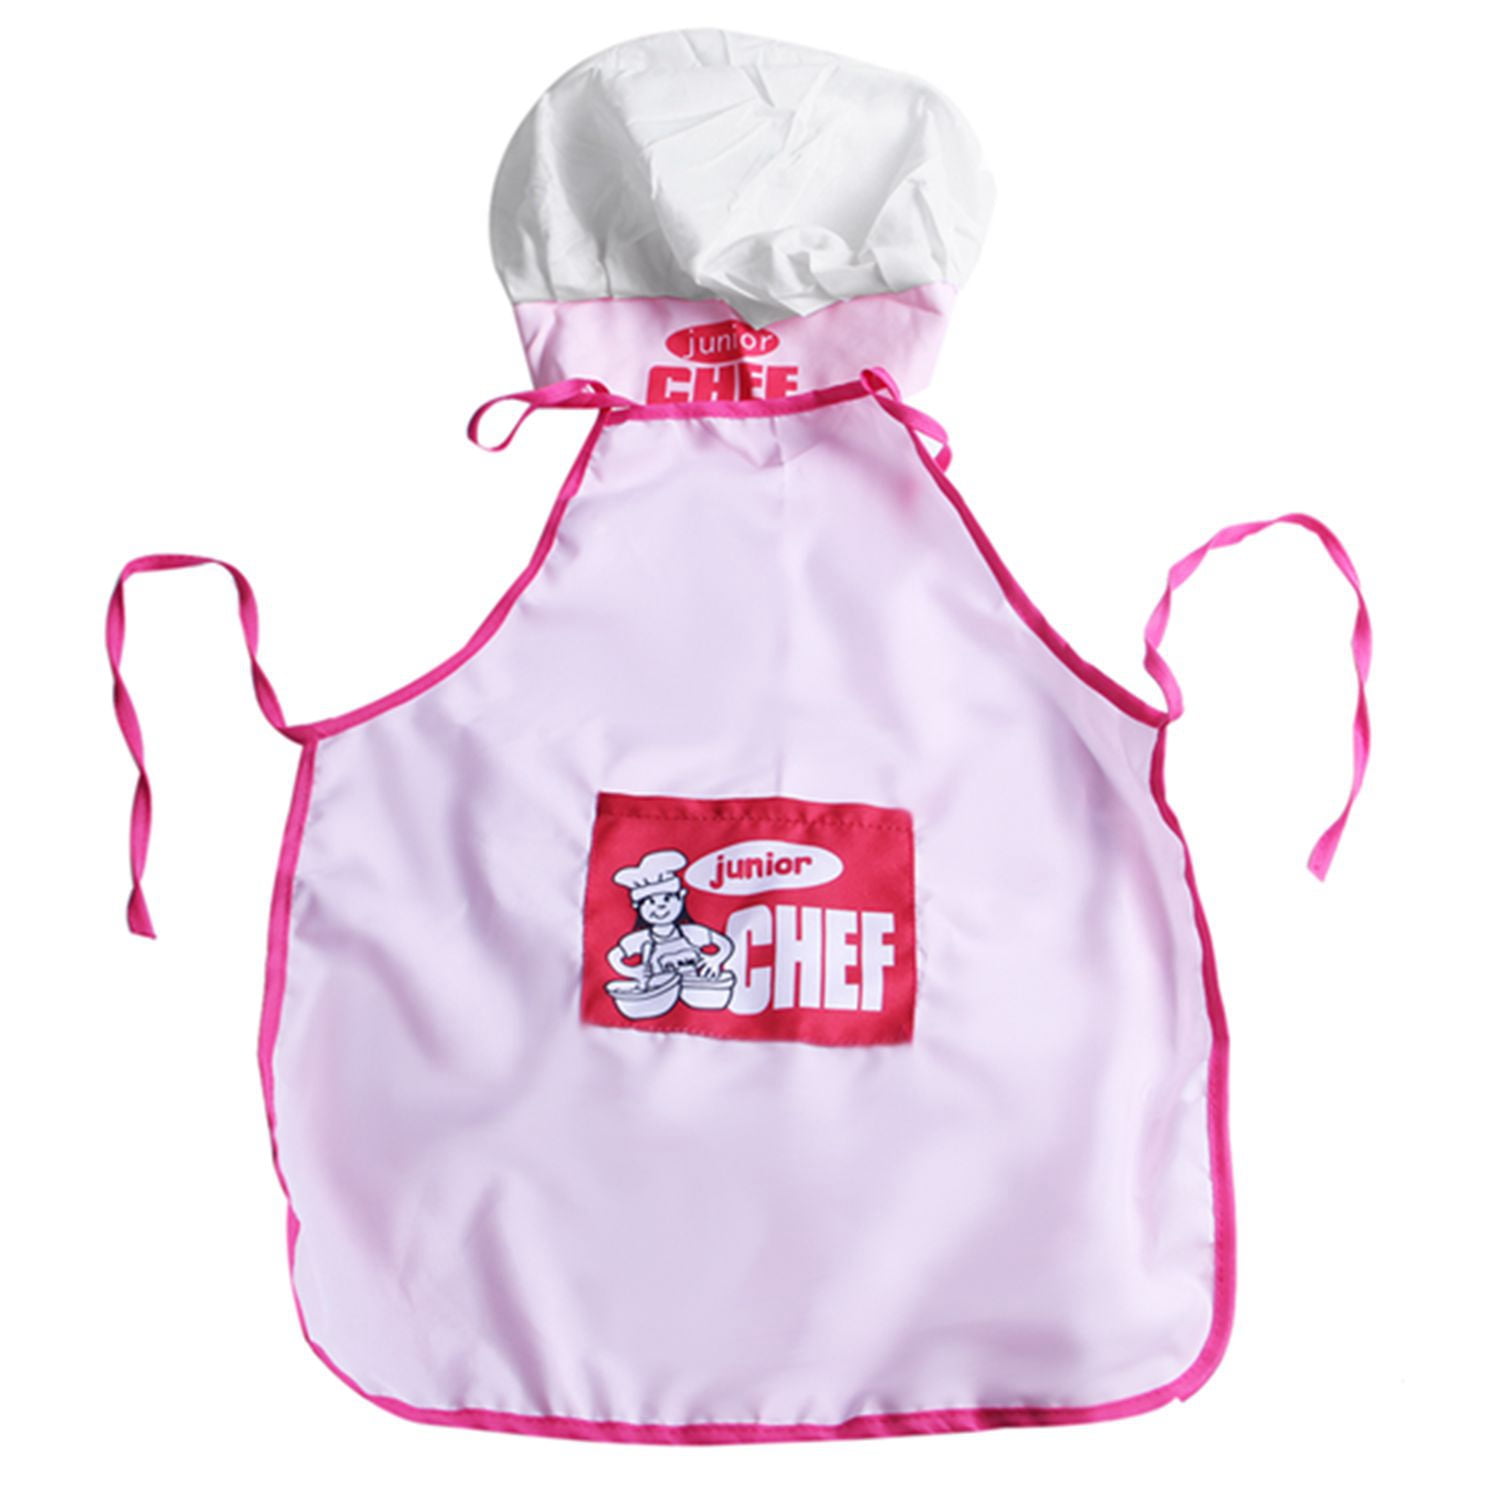 Details about   Childs Kids Chef Hat Apron Cooking Baking Boy Girl Chefs Junior Gift Q4E1 